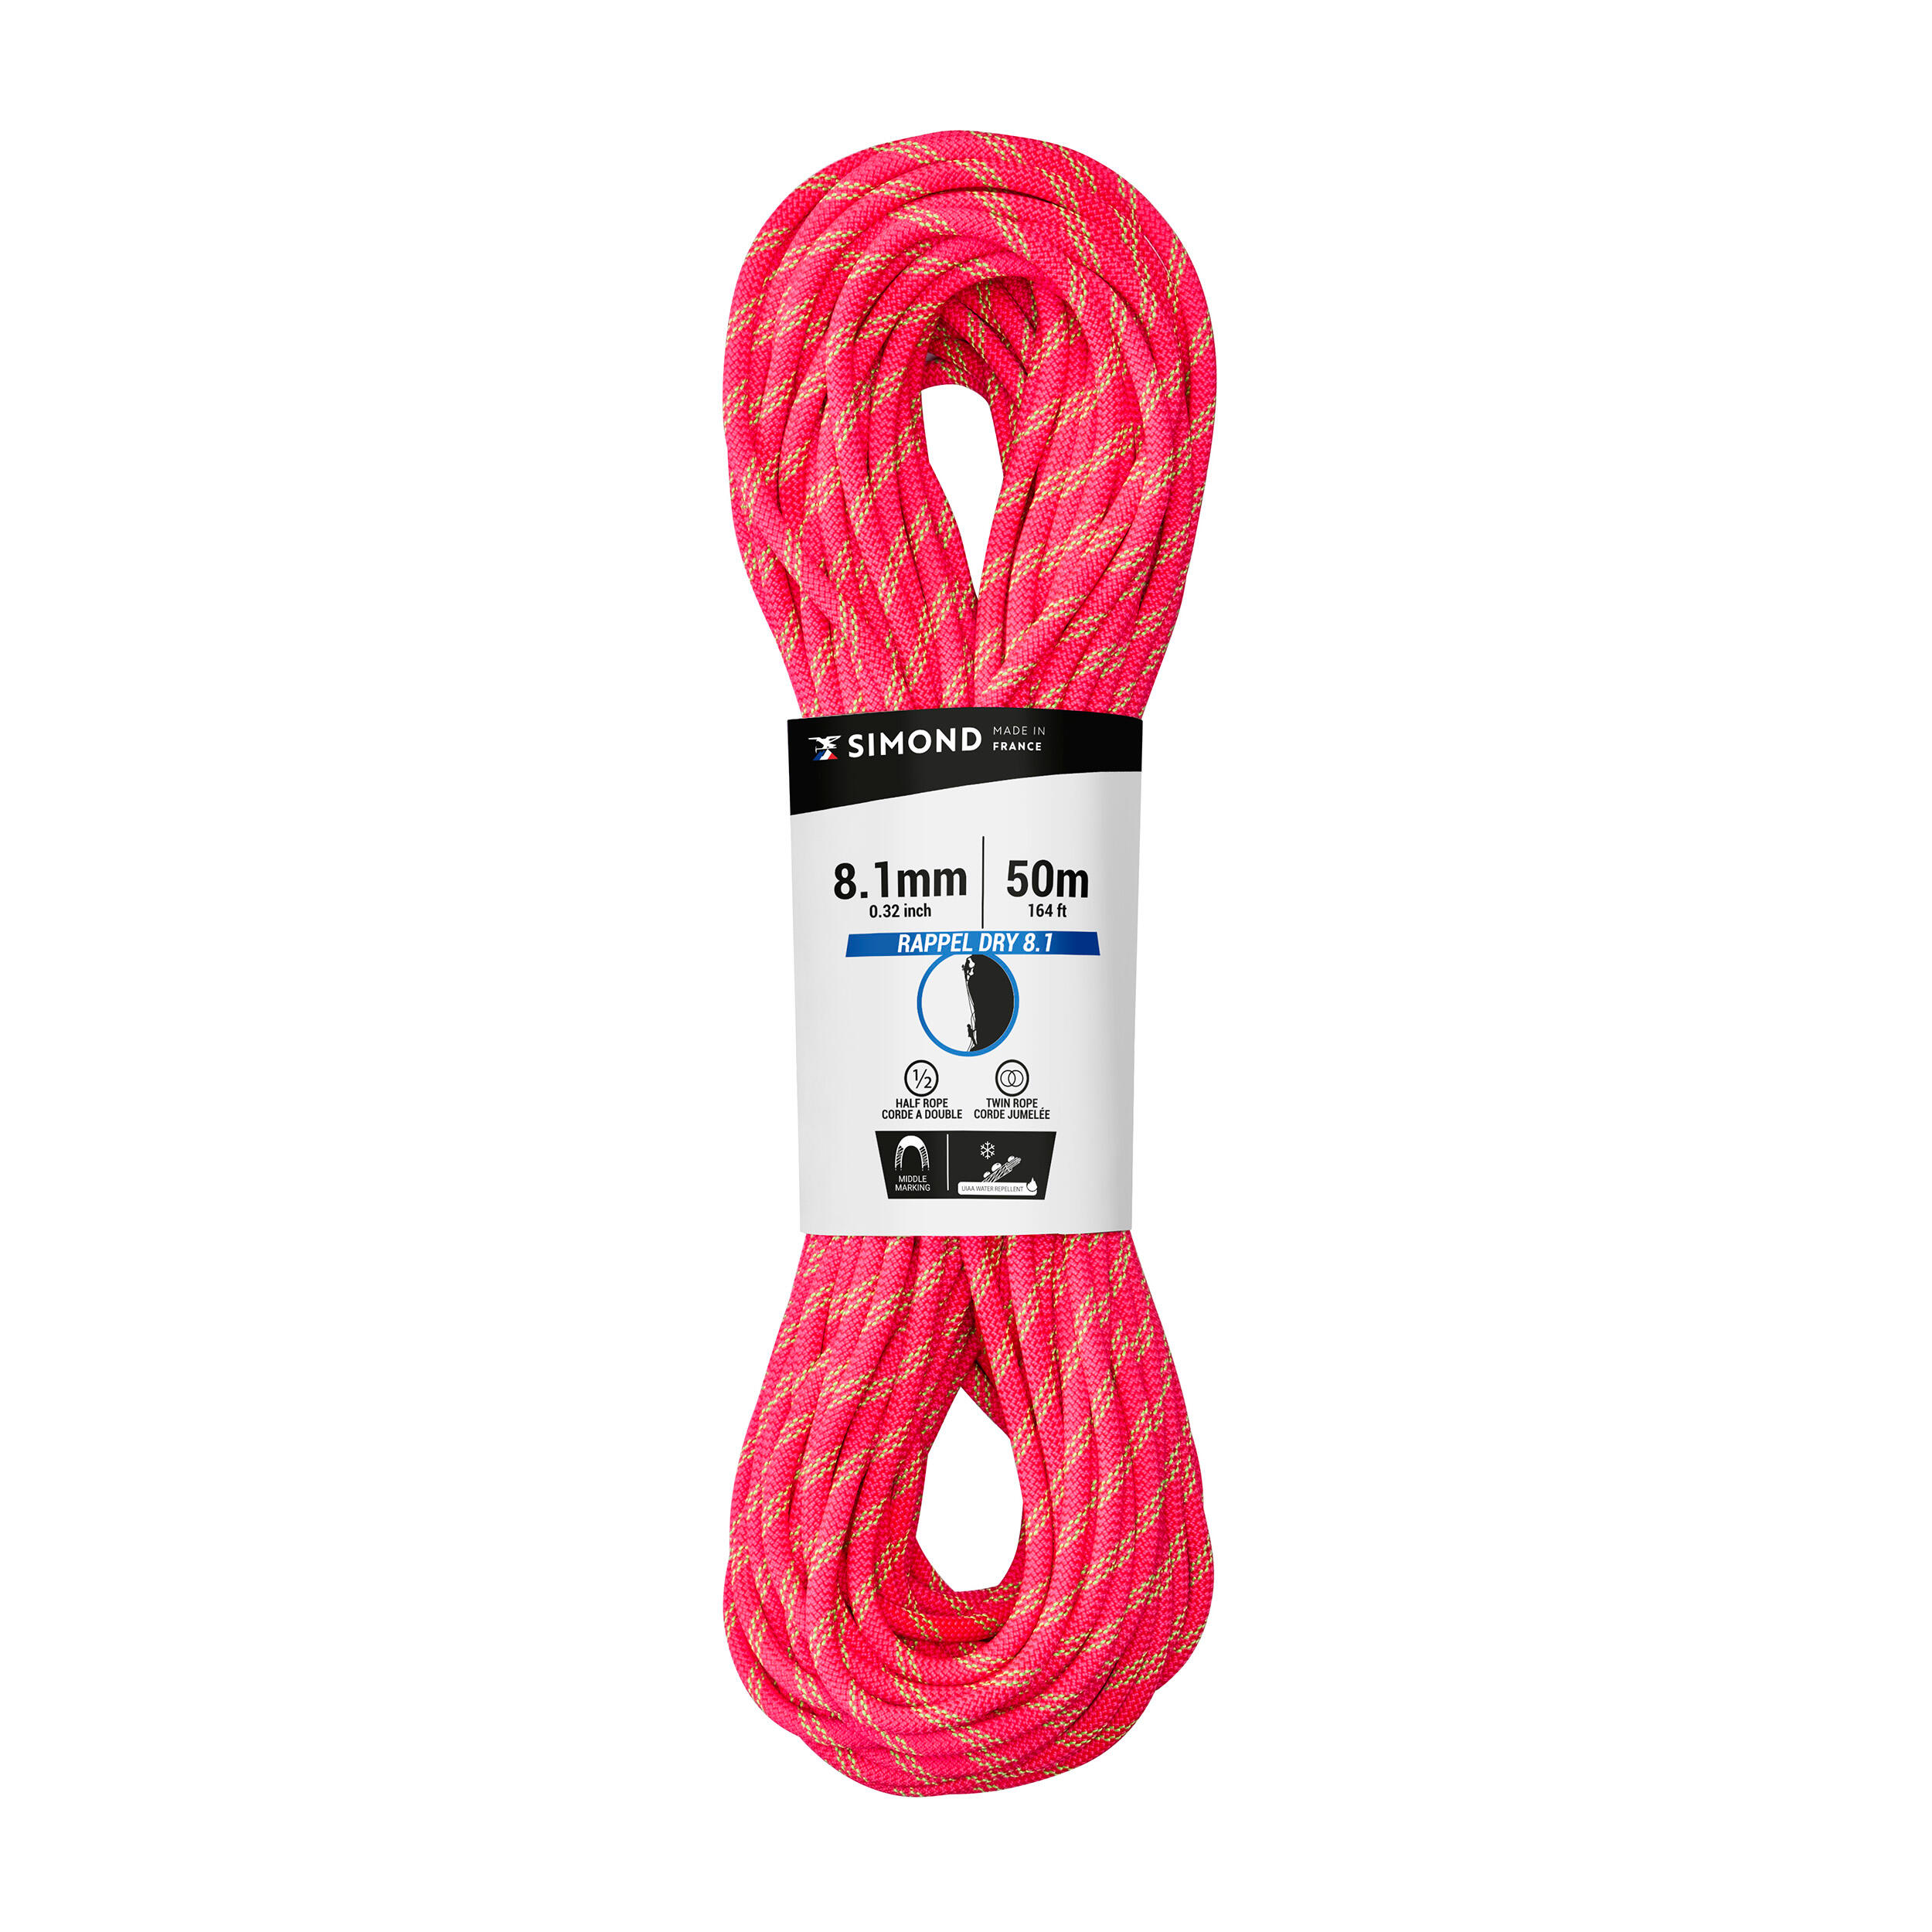 Double dry climbing and mountaineering rope 8.1 mm x 50 m - Rappel 8.1 Pink  SIMOND